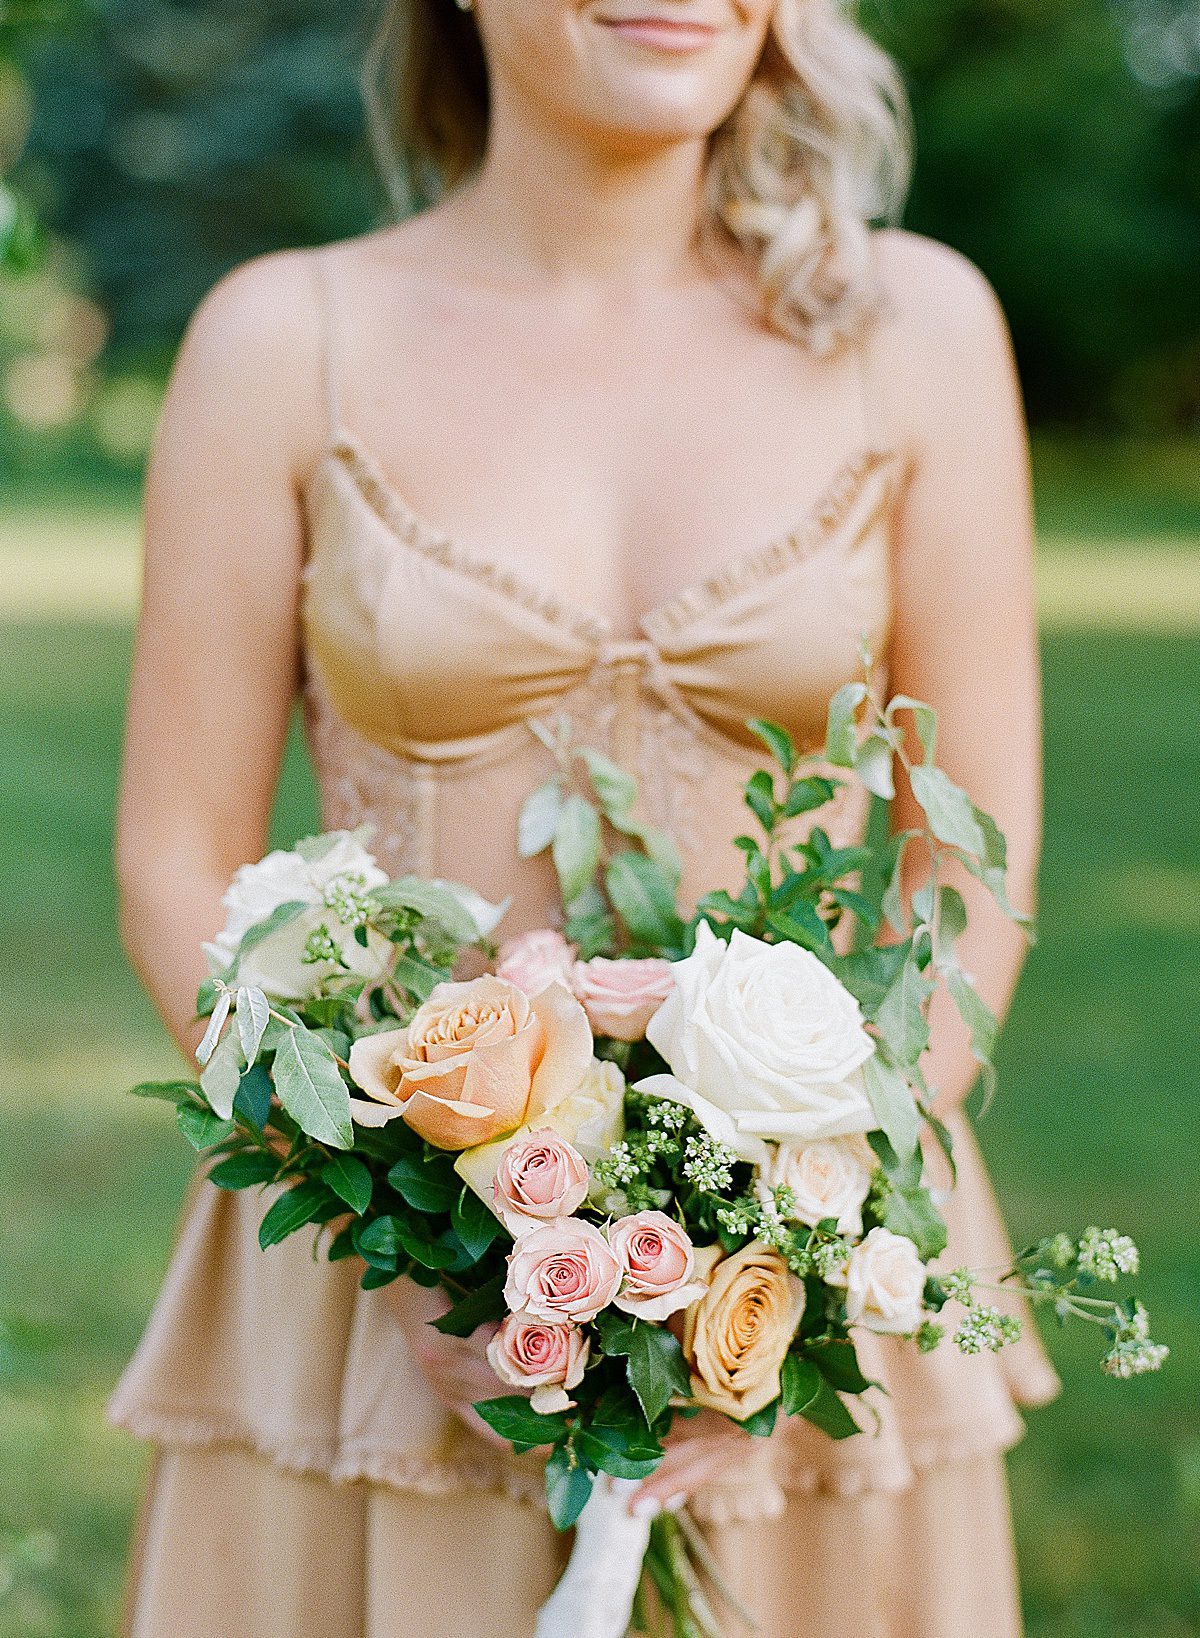 Maid of Honor Holding Bouquet of Flowers Photo